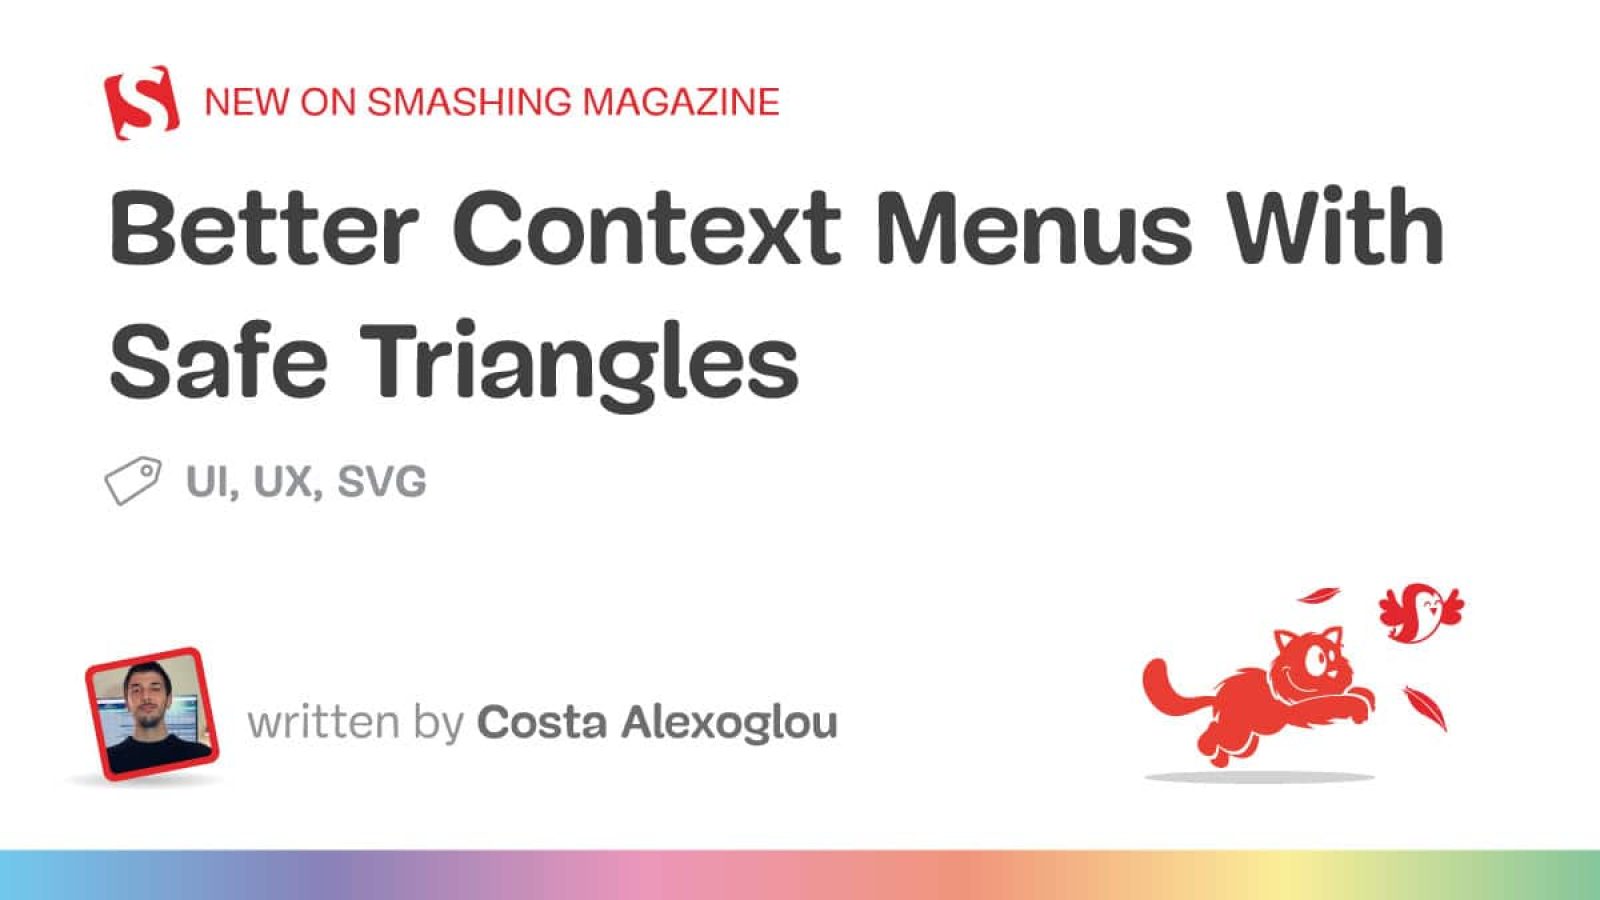 Higher Context Menus With Protected Triangles